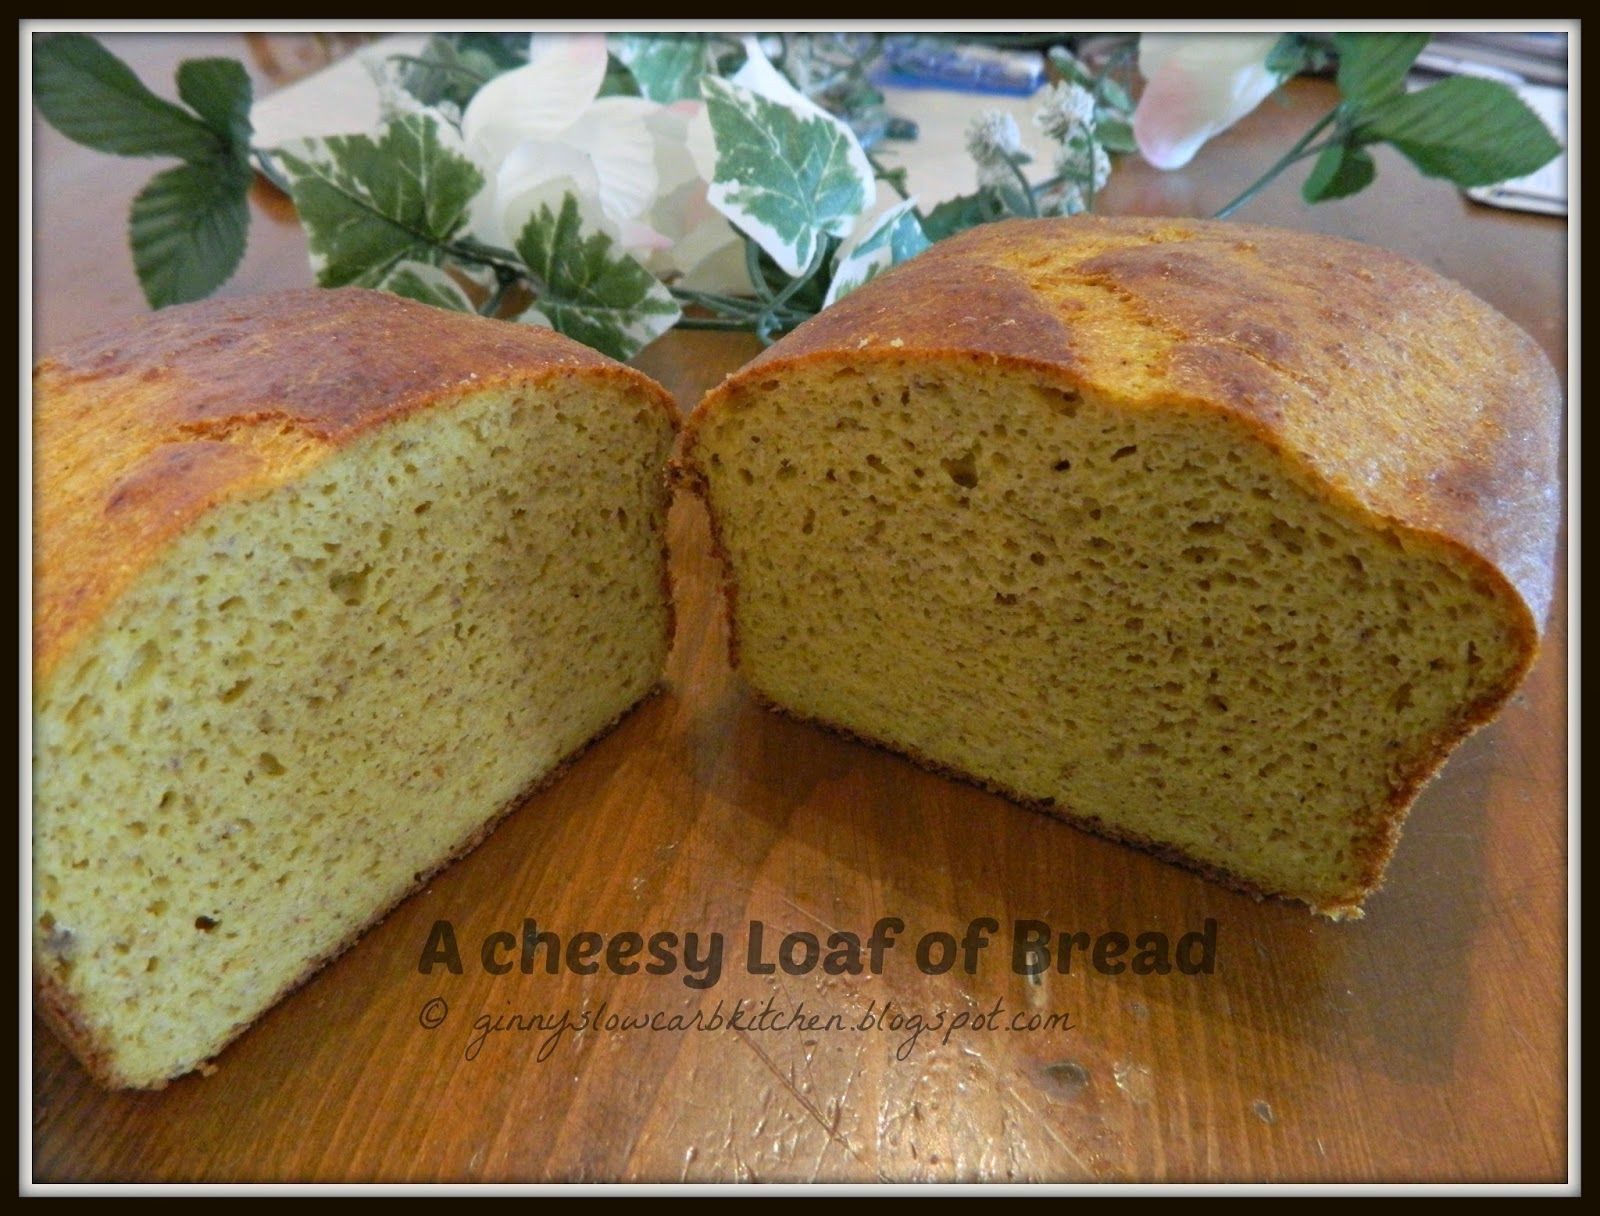 Atkins Low Carb Bread
 Ginny s Low Carb Kitchen CHEESY LOAF OF BREAD